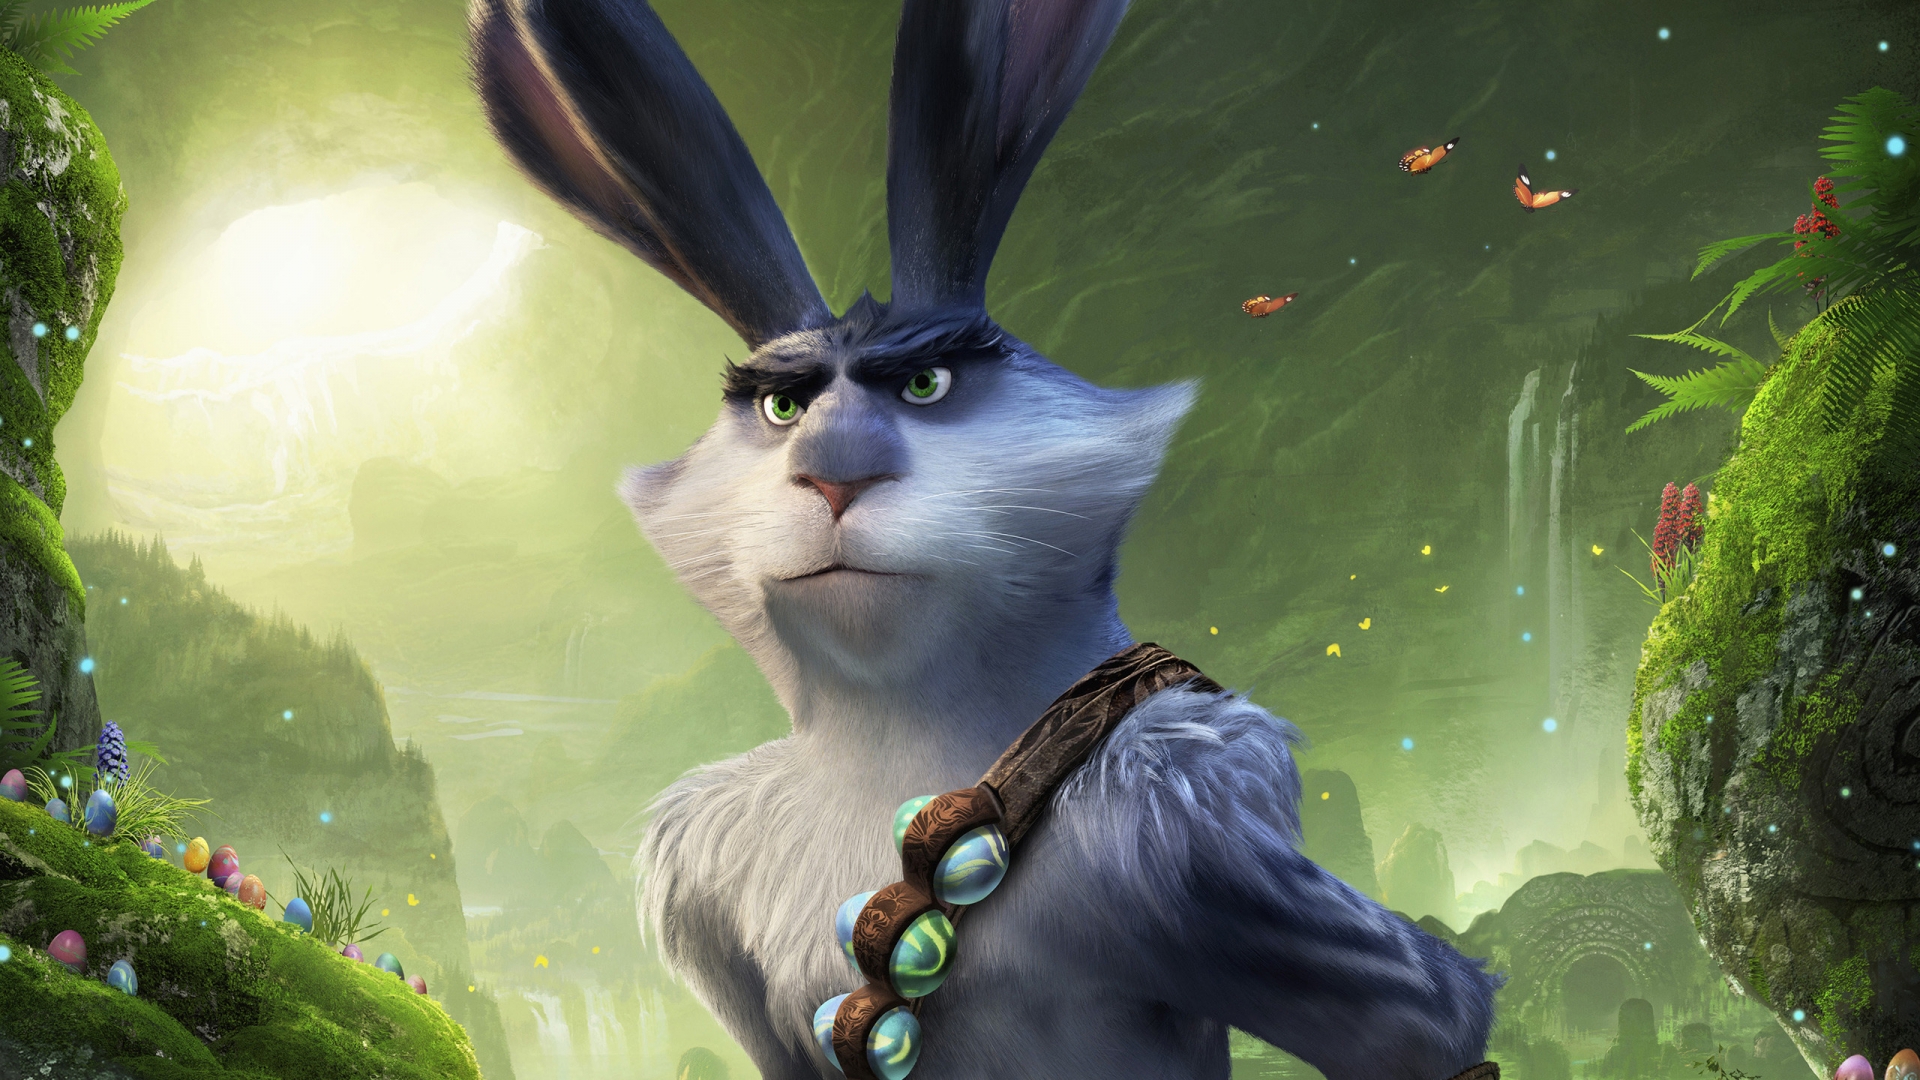 The Easter Bunny Rise Of The Guardians for 1920 x 1080 HDTV 1080p resolution